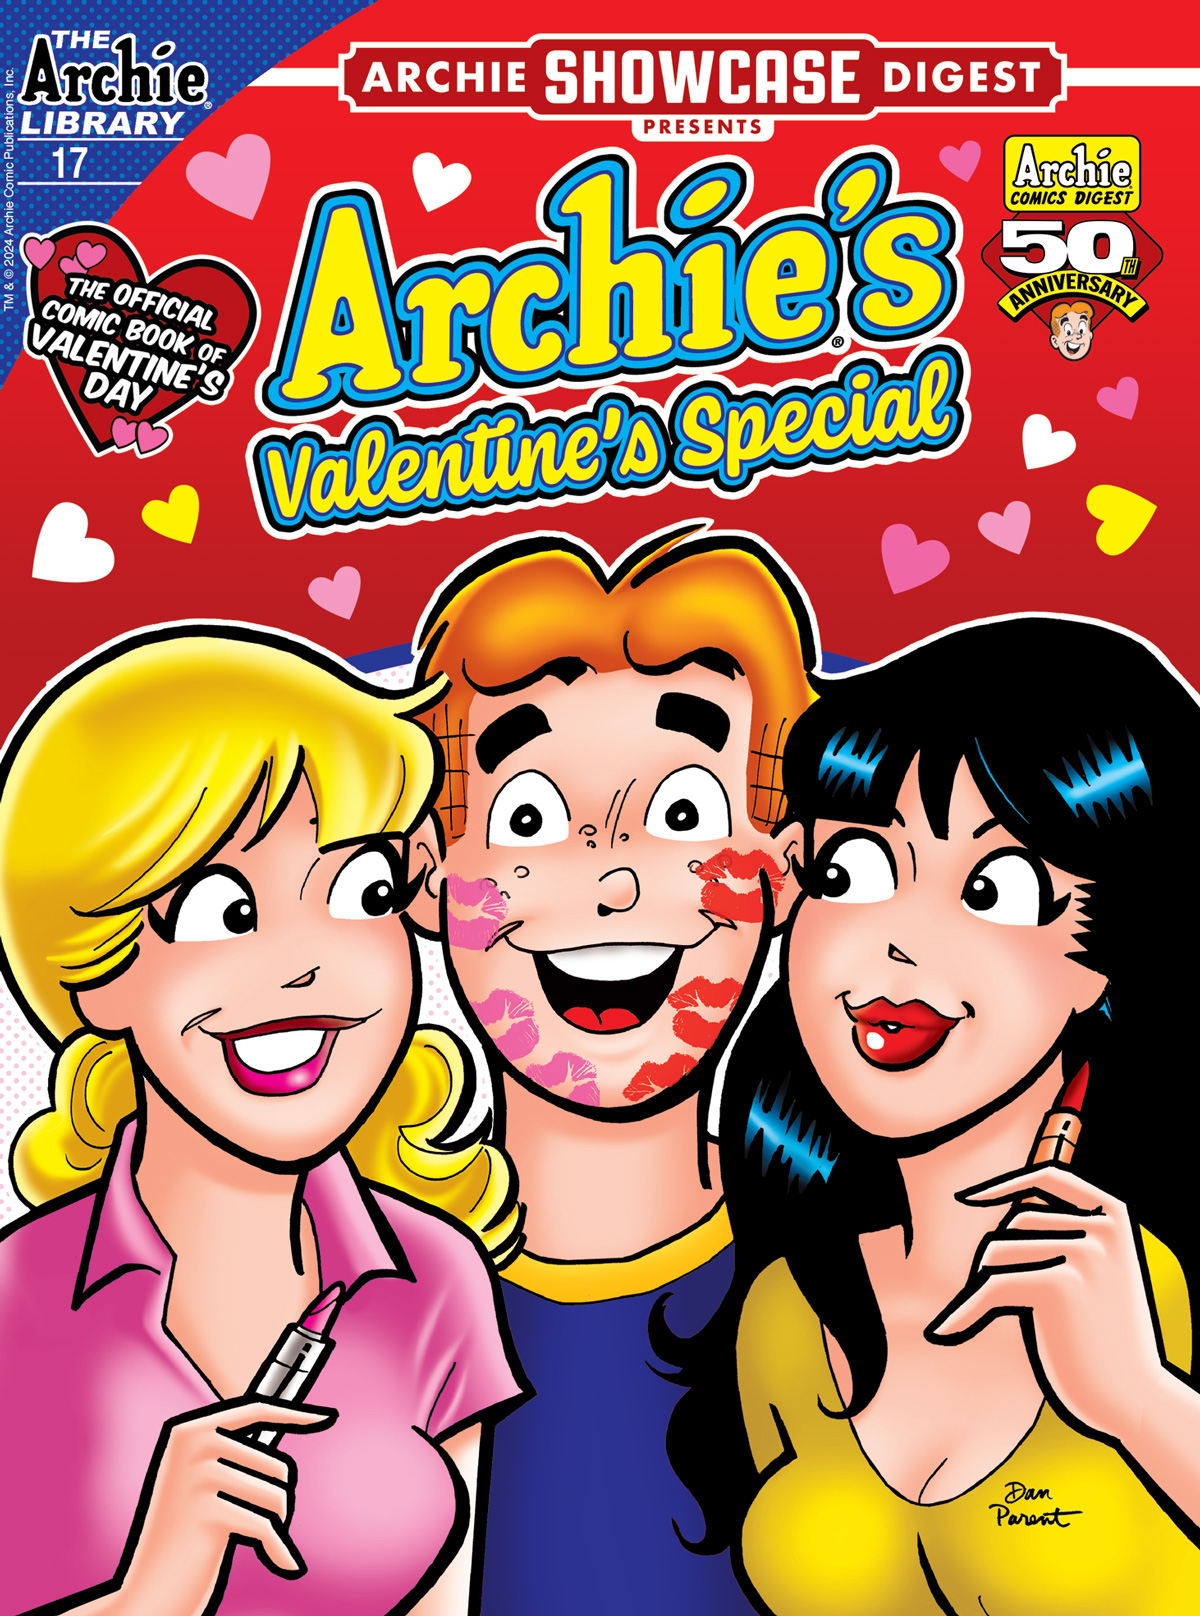 The cover of Archie Showcase Digest #17